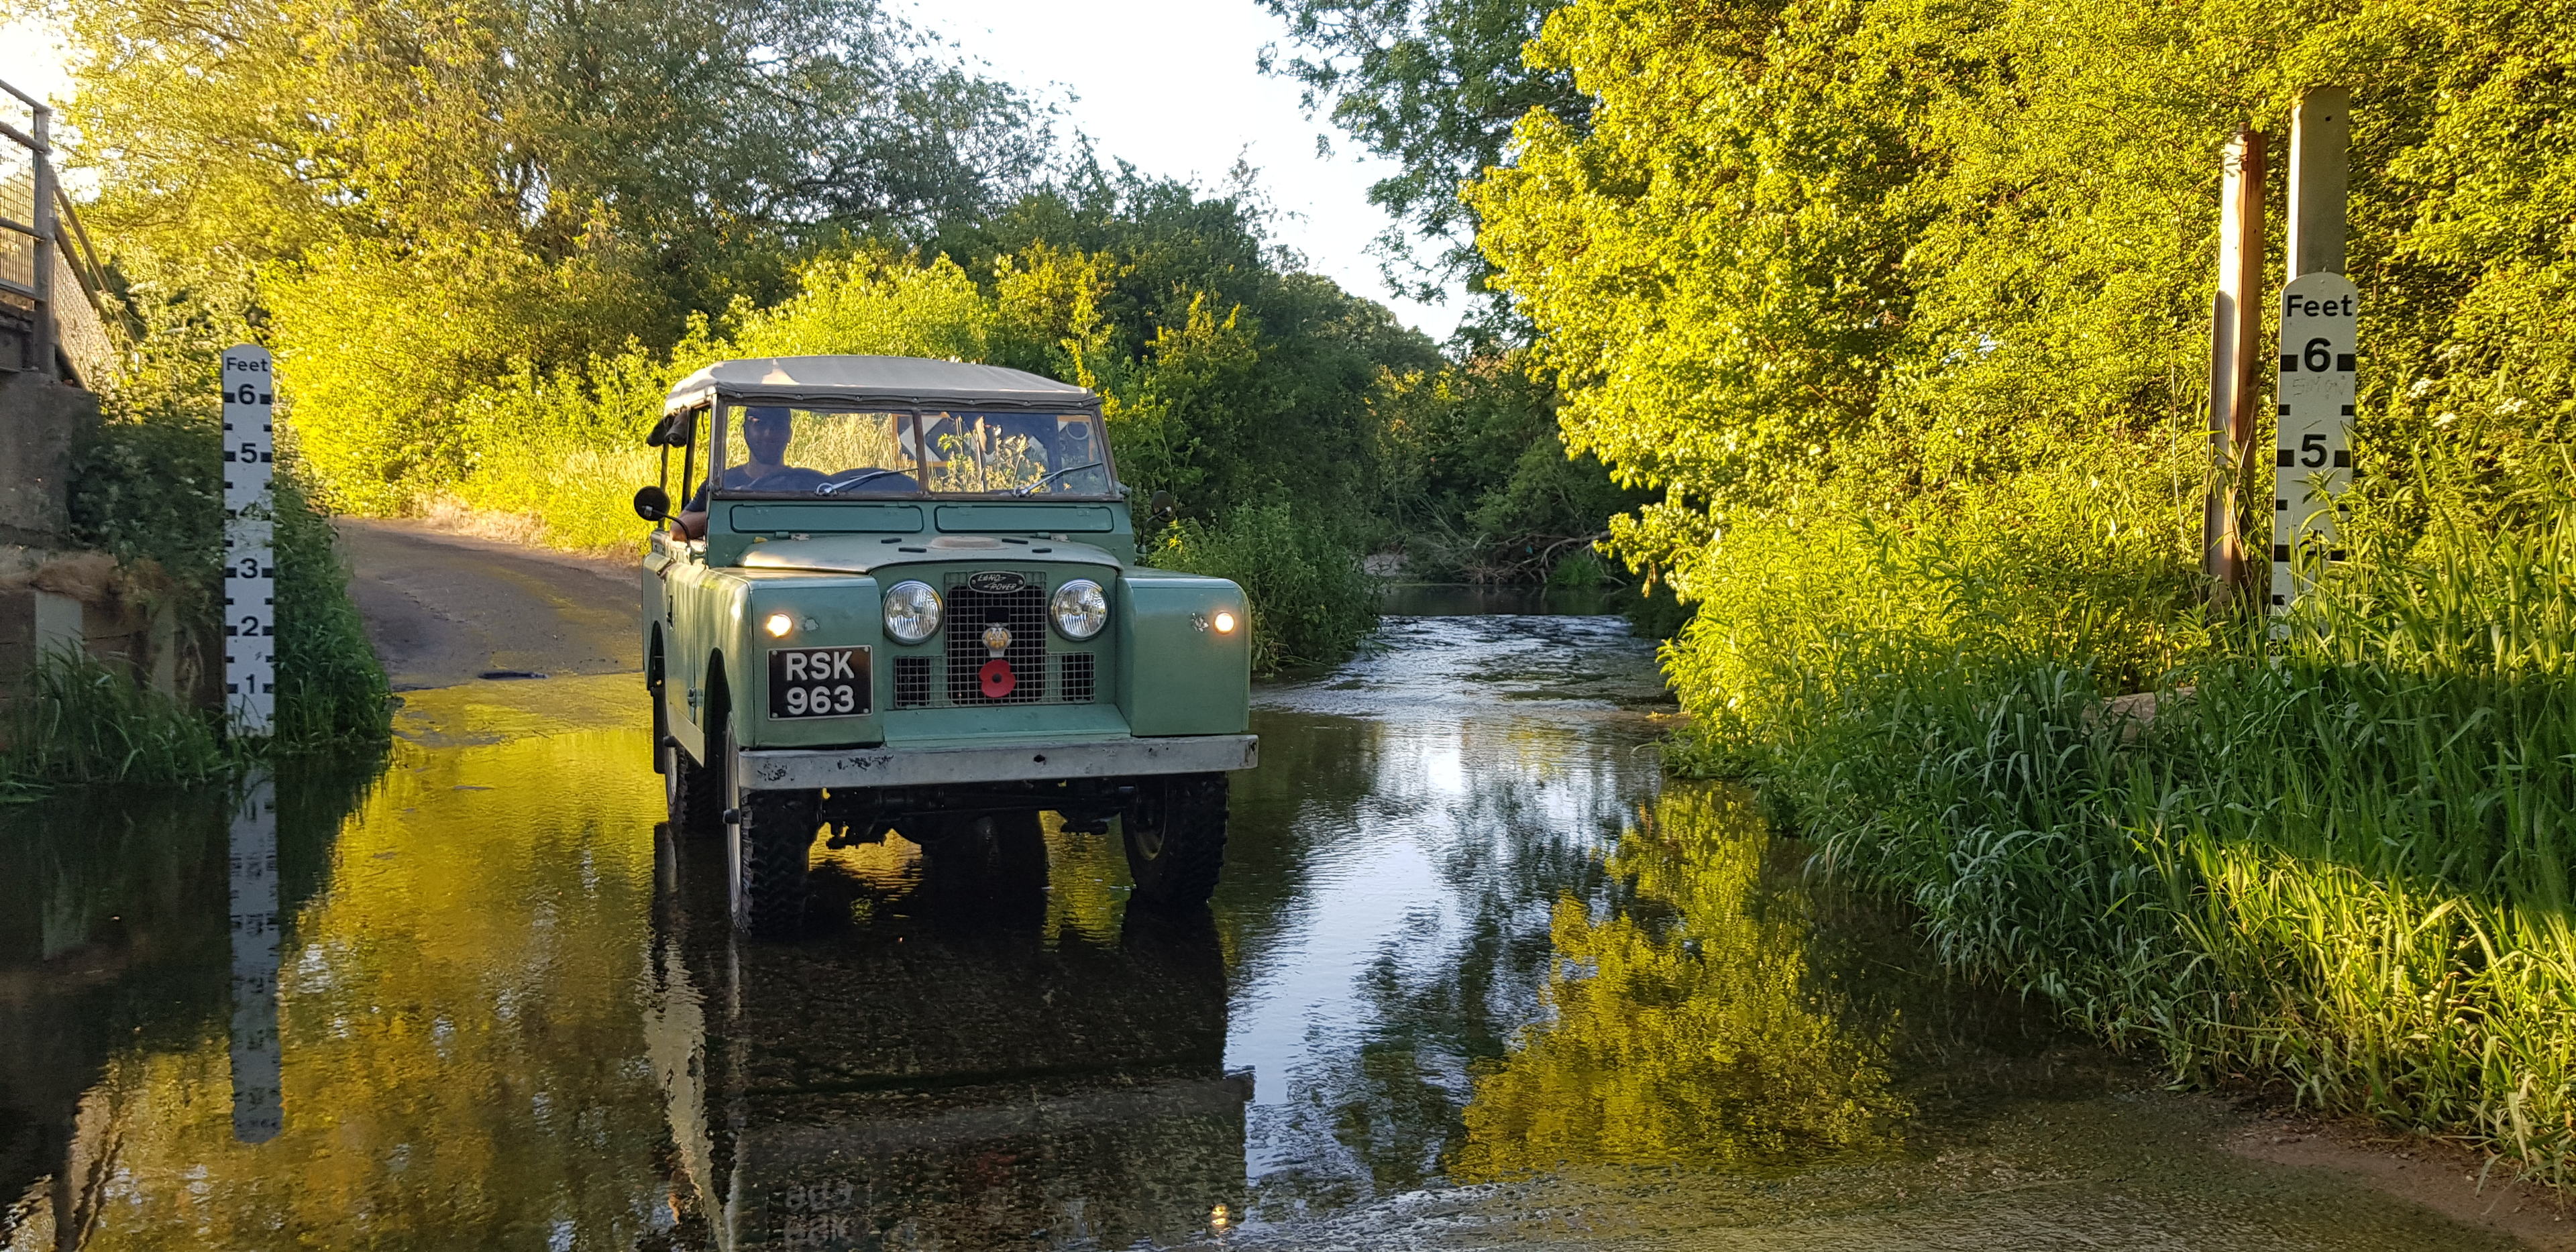 show us your land rover - Page 106 - Land Rover - PistonHeads